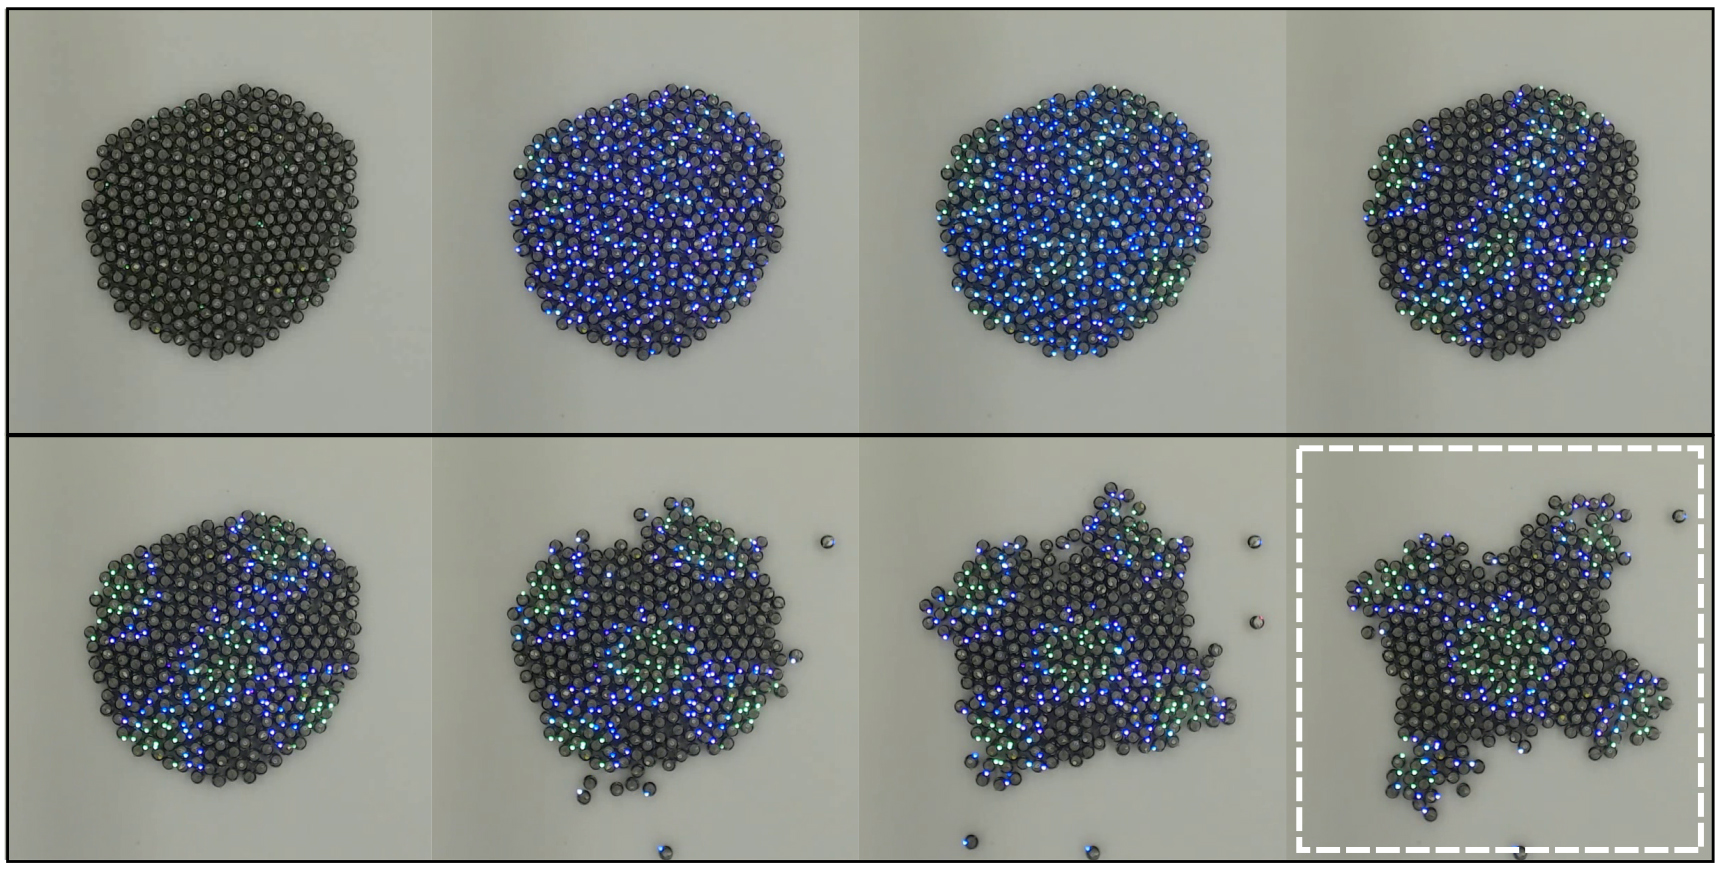 Emergence of different swarm shapes via a Turing pattern